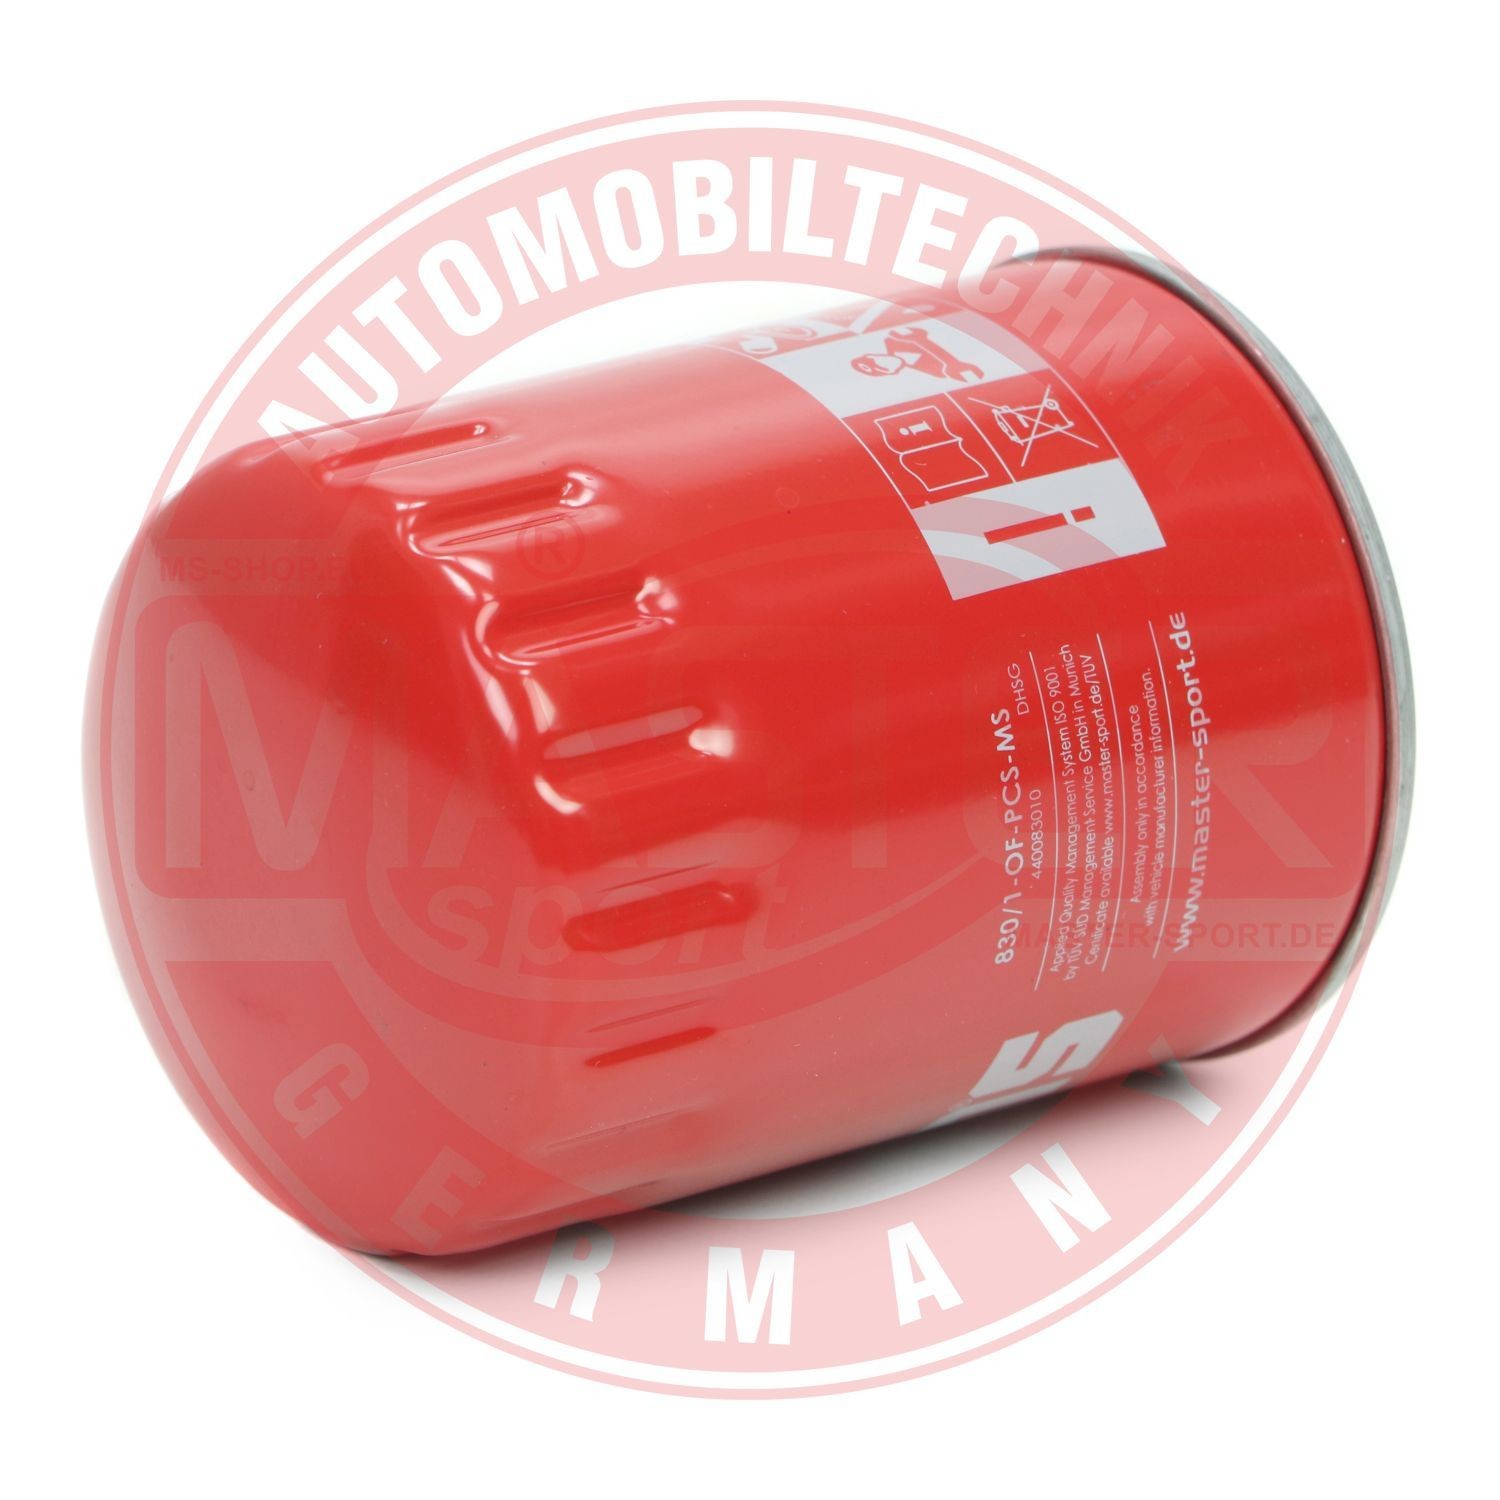 MASTER-SPORT 830/1-OF-PCS-MS Oil filter 3/4-16 UNF, with one anti-return valve, Filter Insert